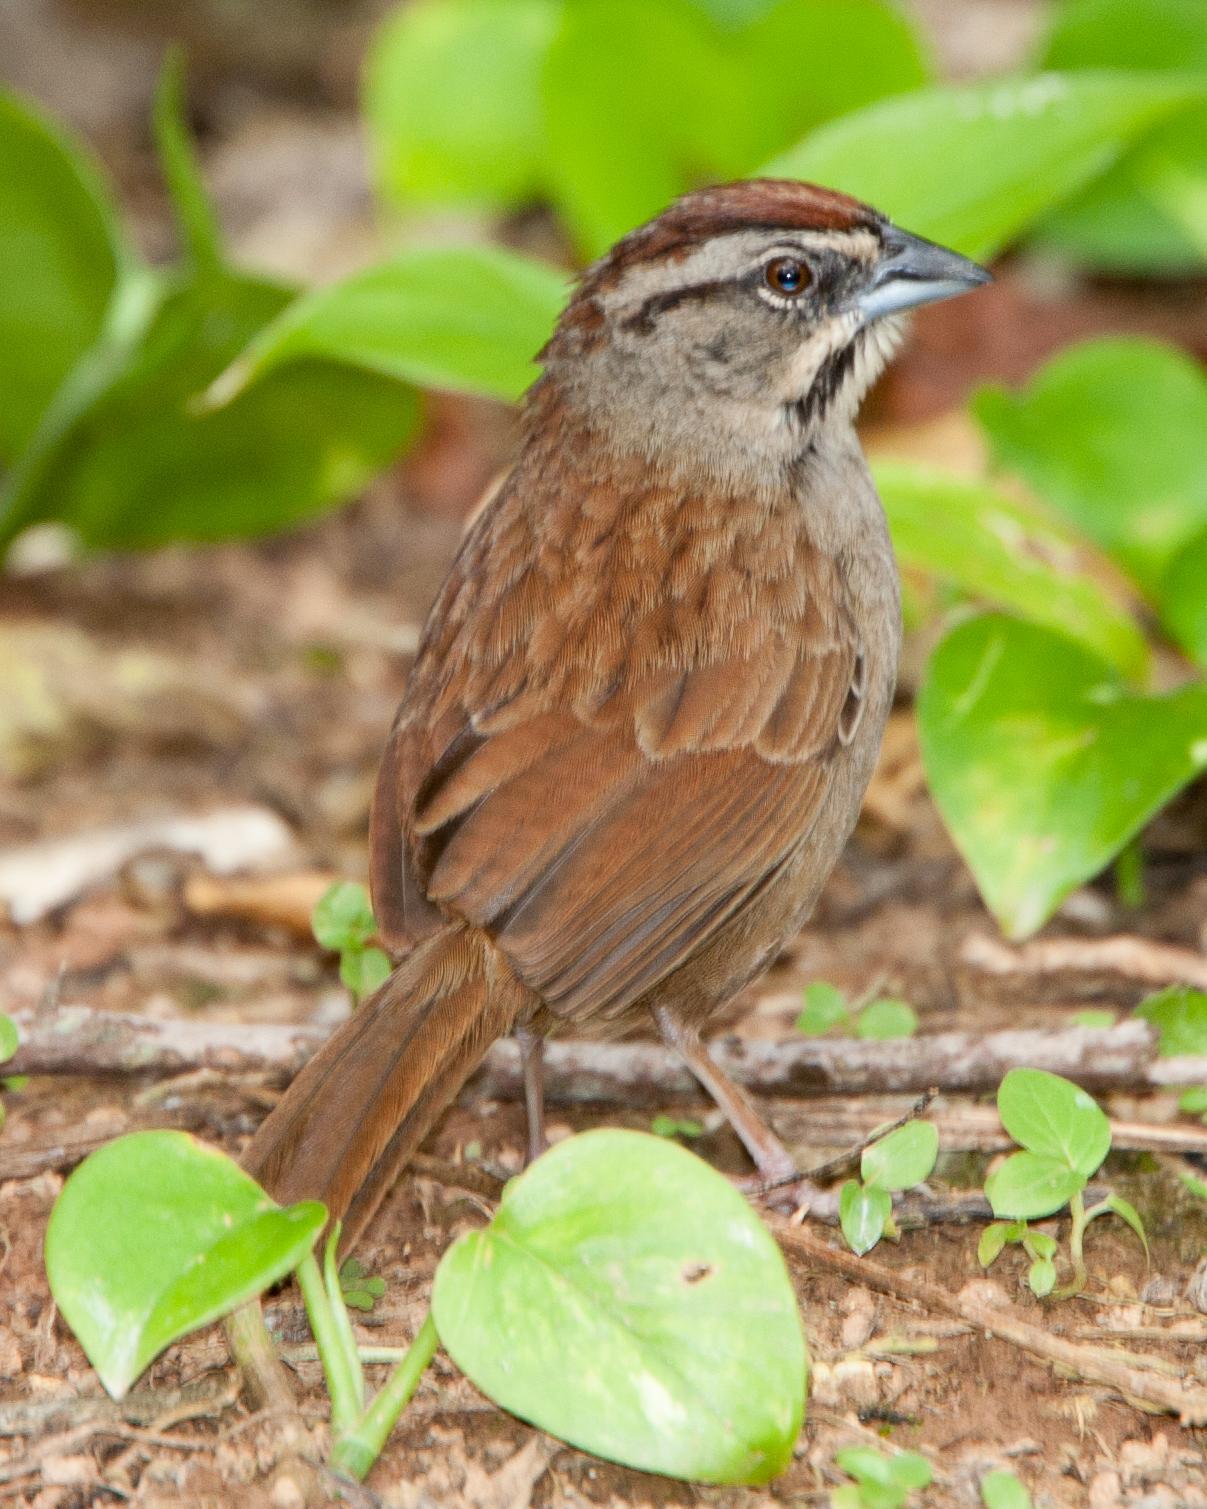 Rusty Sparrow Photo by Robert Lewis